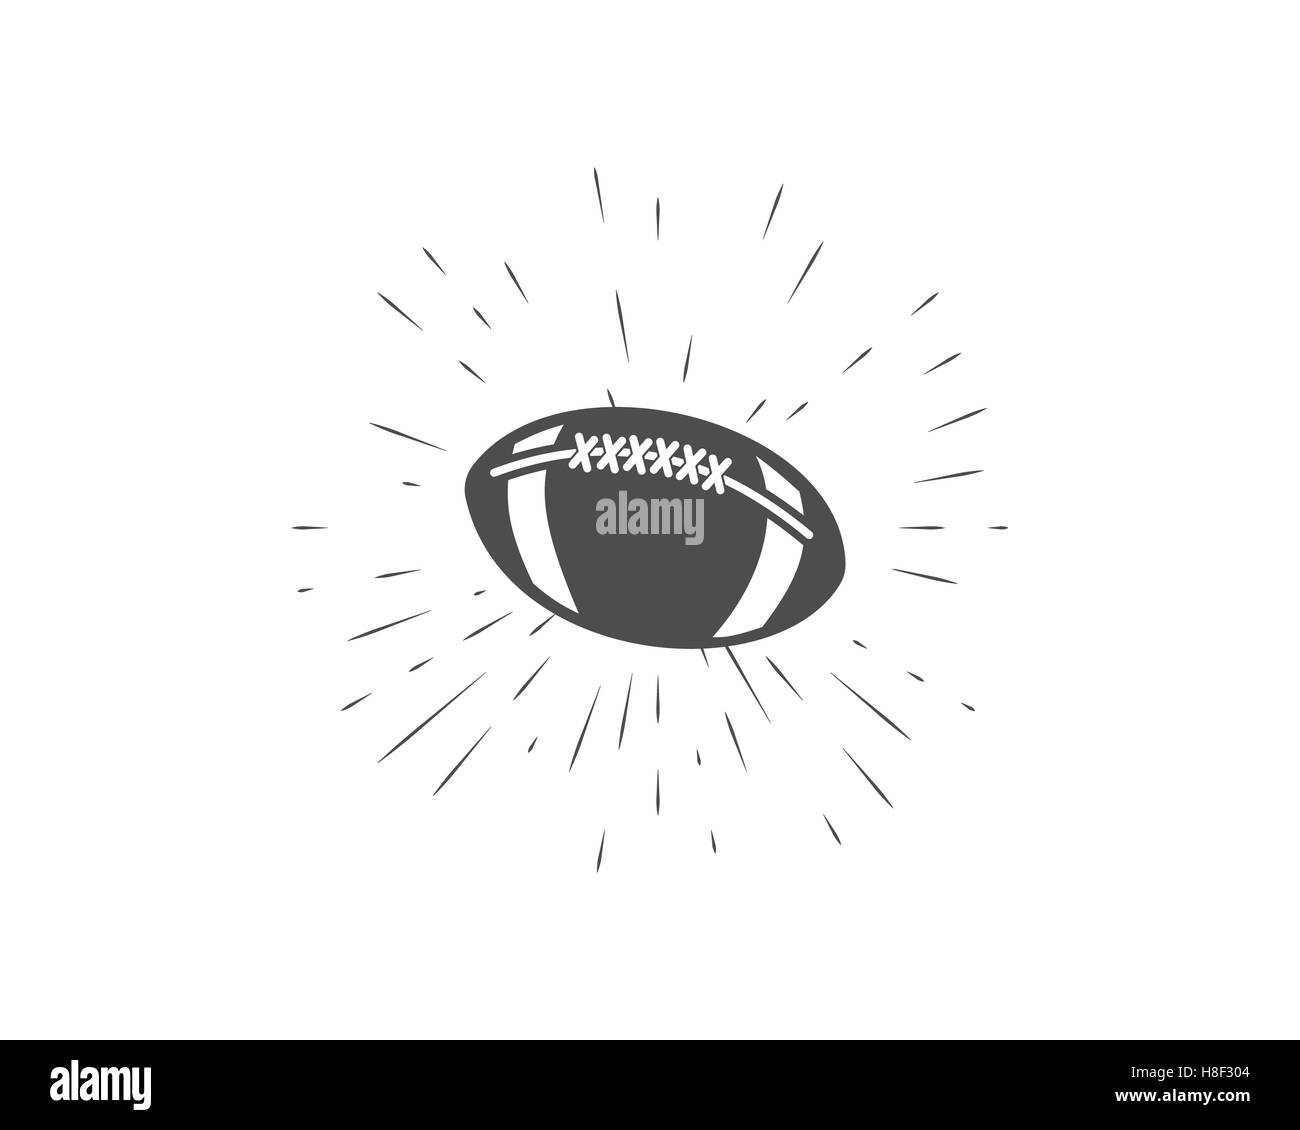 Vintage american football and rugby label, emblem and logo design with sunburst element. Hand drawn monochrome style with ball. Usa sports identity symbol. illustration. Stock Photo